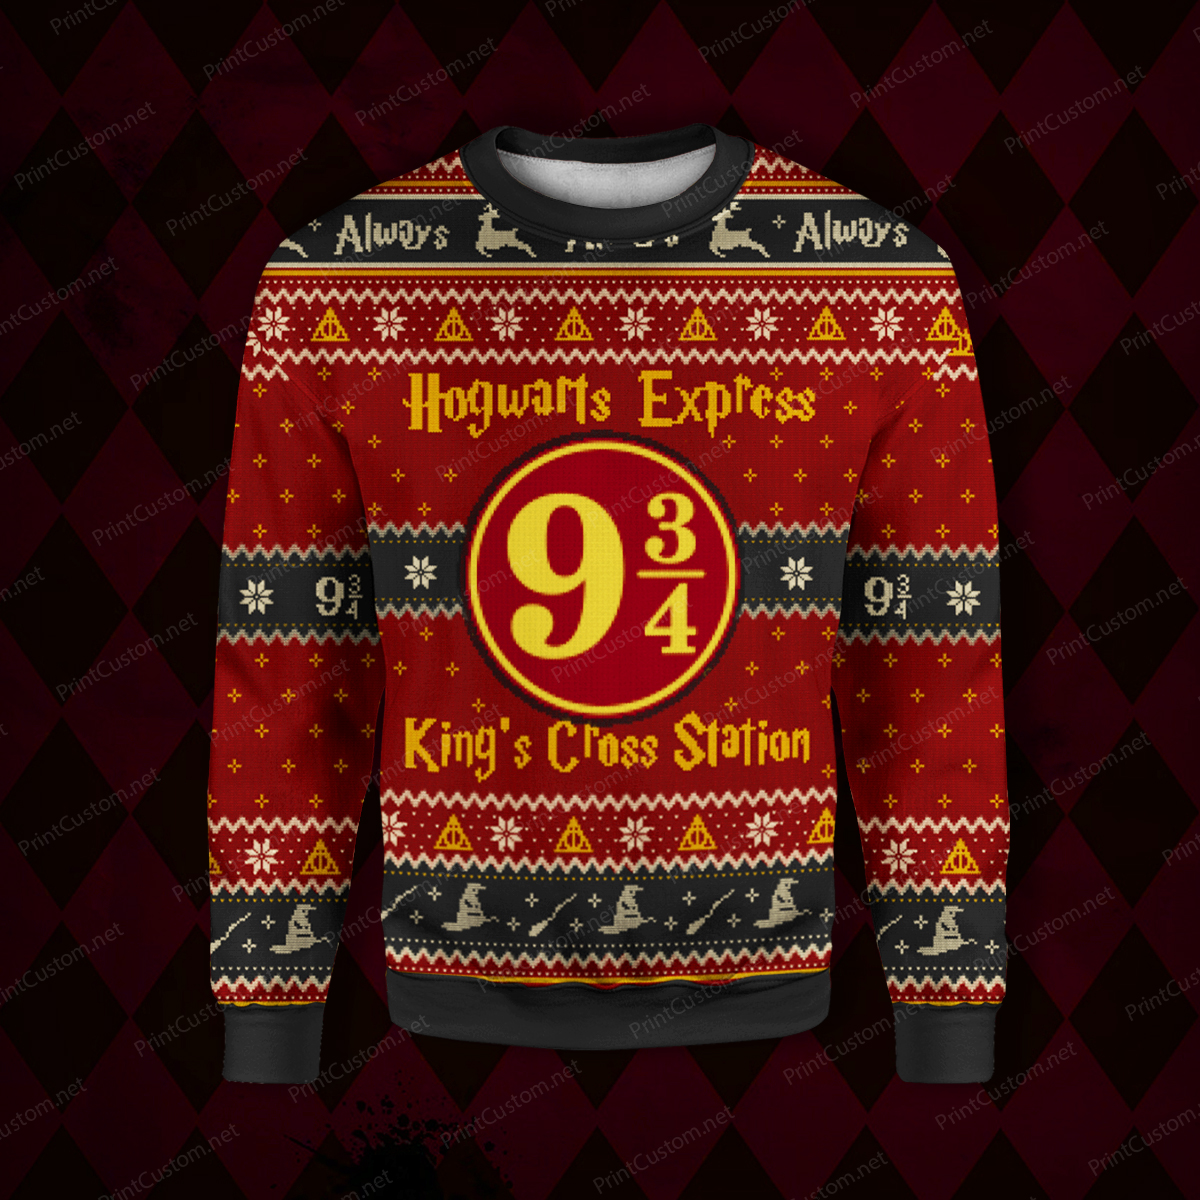 King's cross station harry potter full printing ugly christmas sweater 1